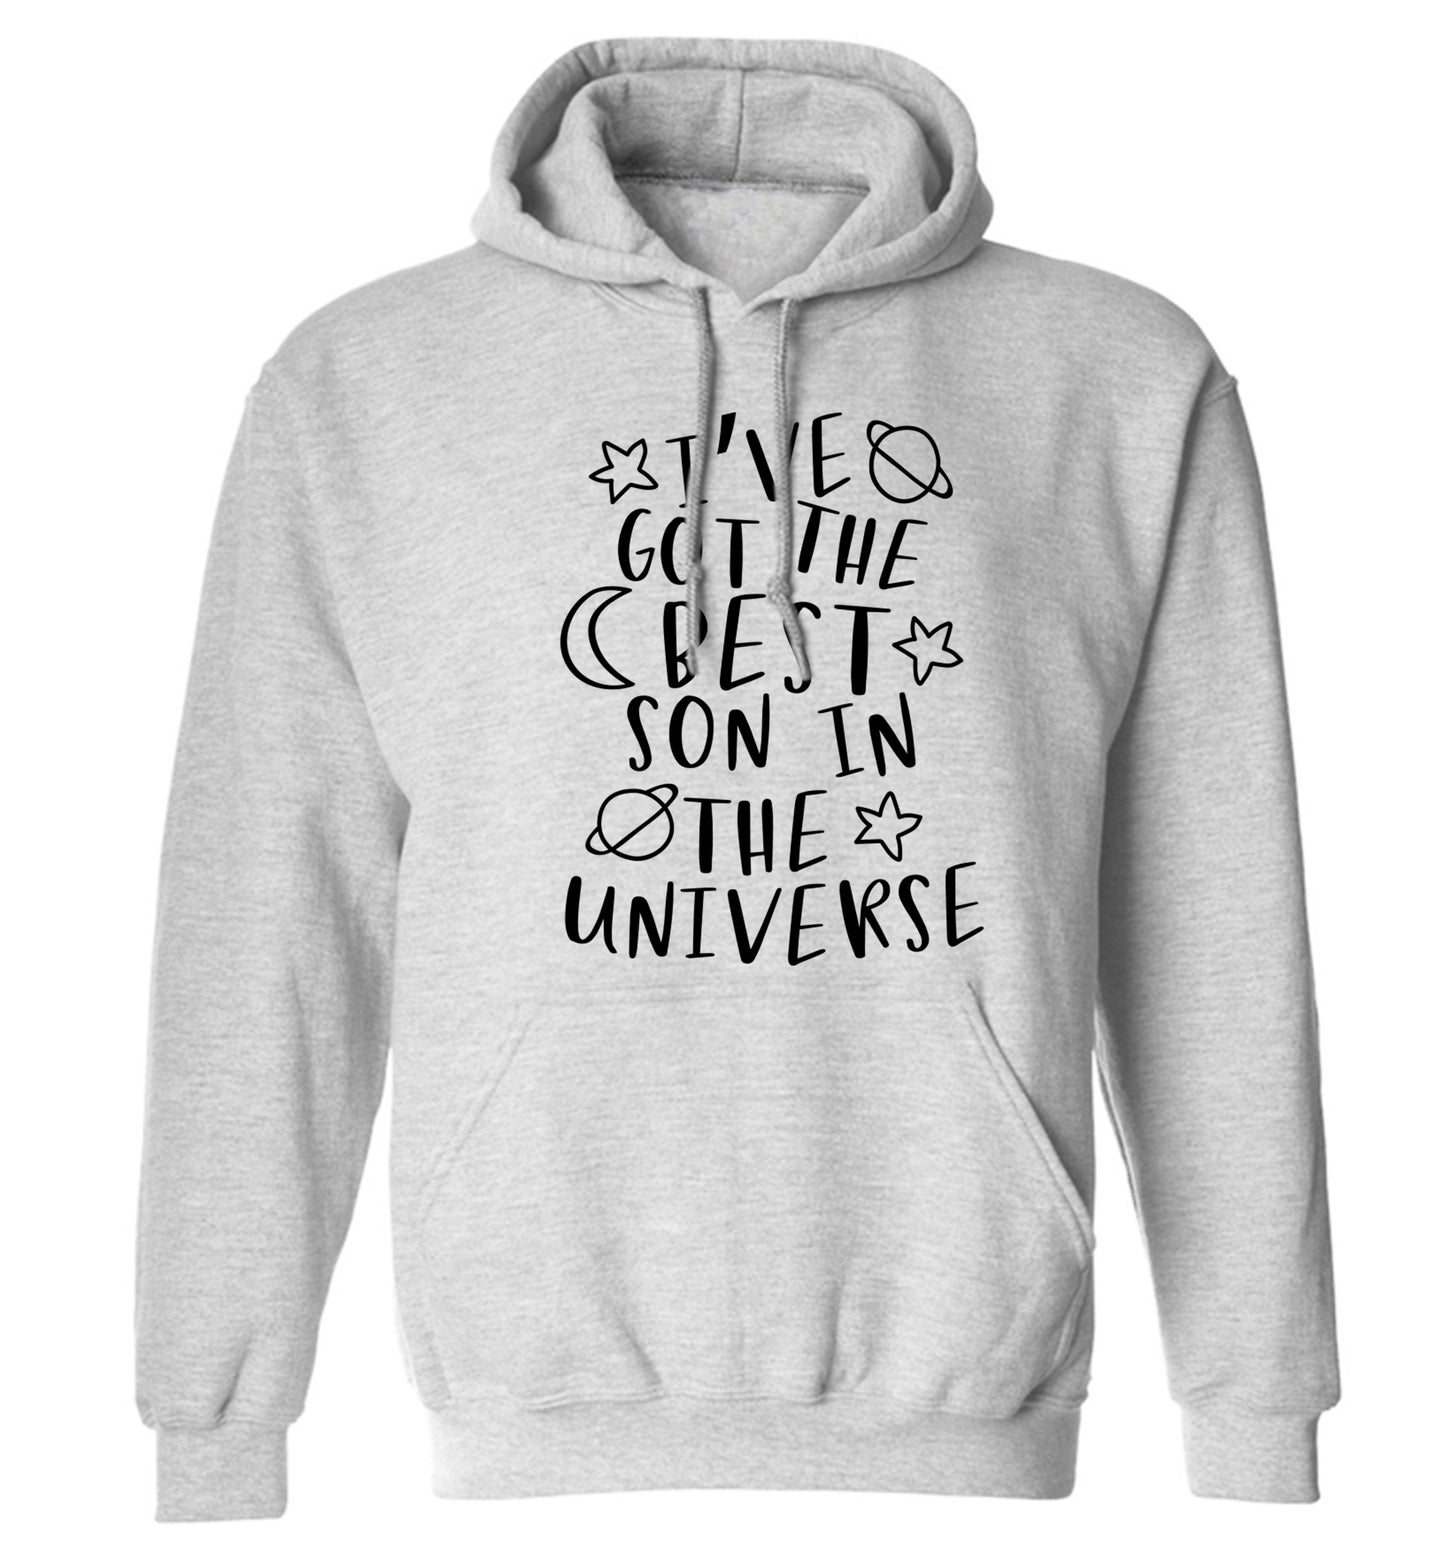 I've got the best son in the universe adults unisex grey hoodie 2XL